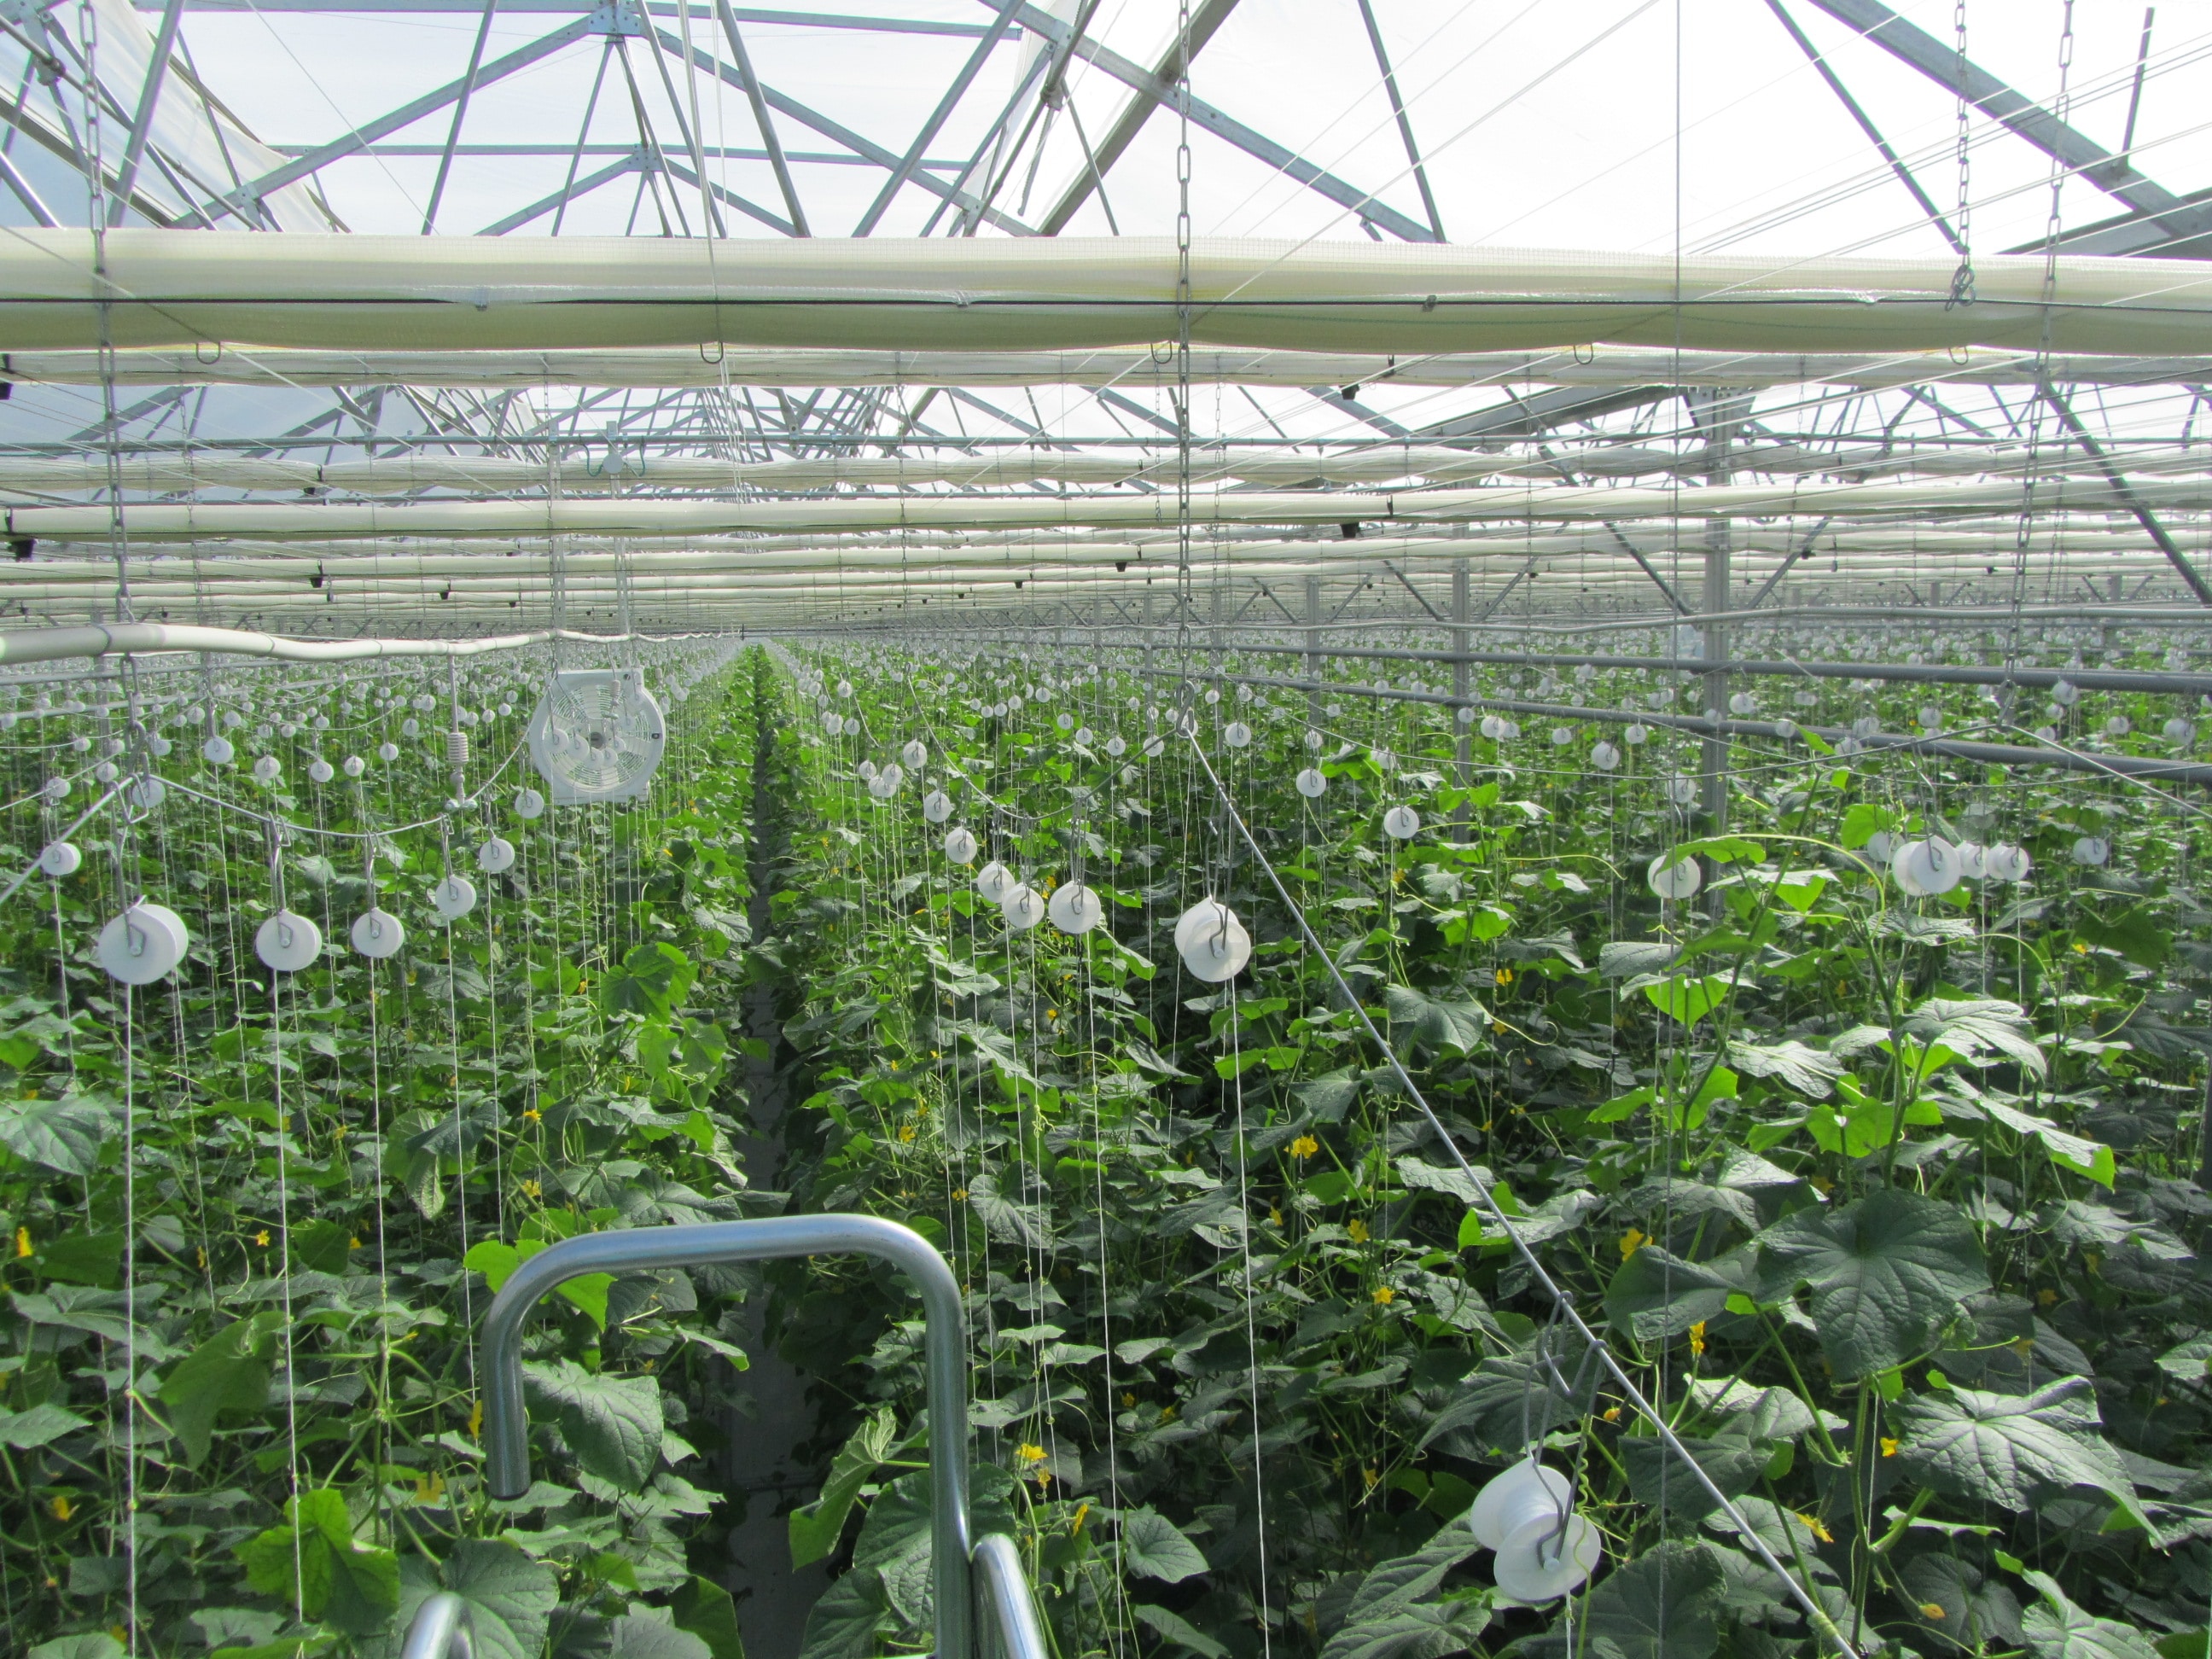 Trellised cucumber plants in a greenhouse